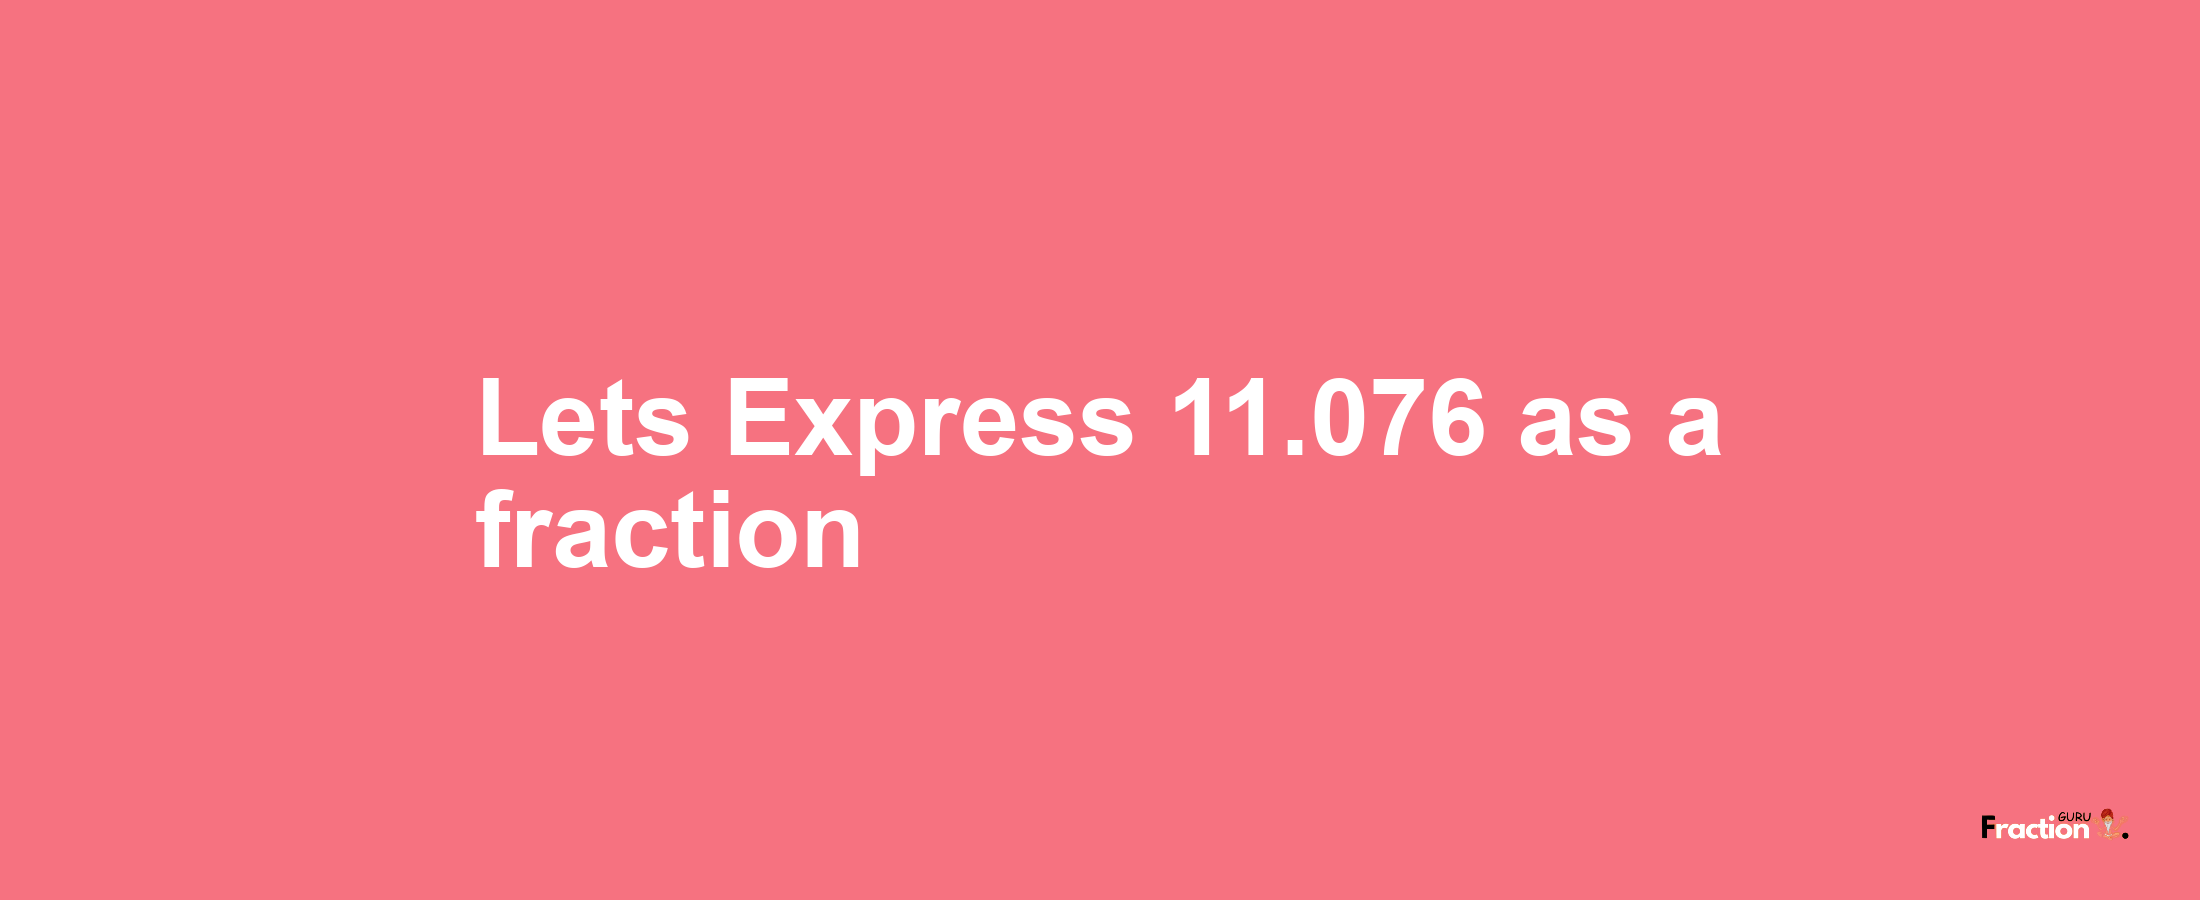 Lets Express 11.076 as afraction